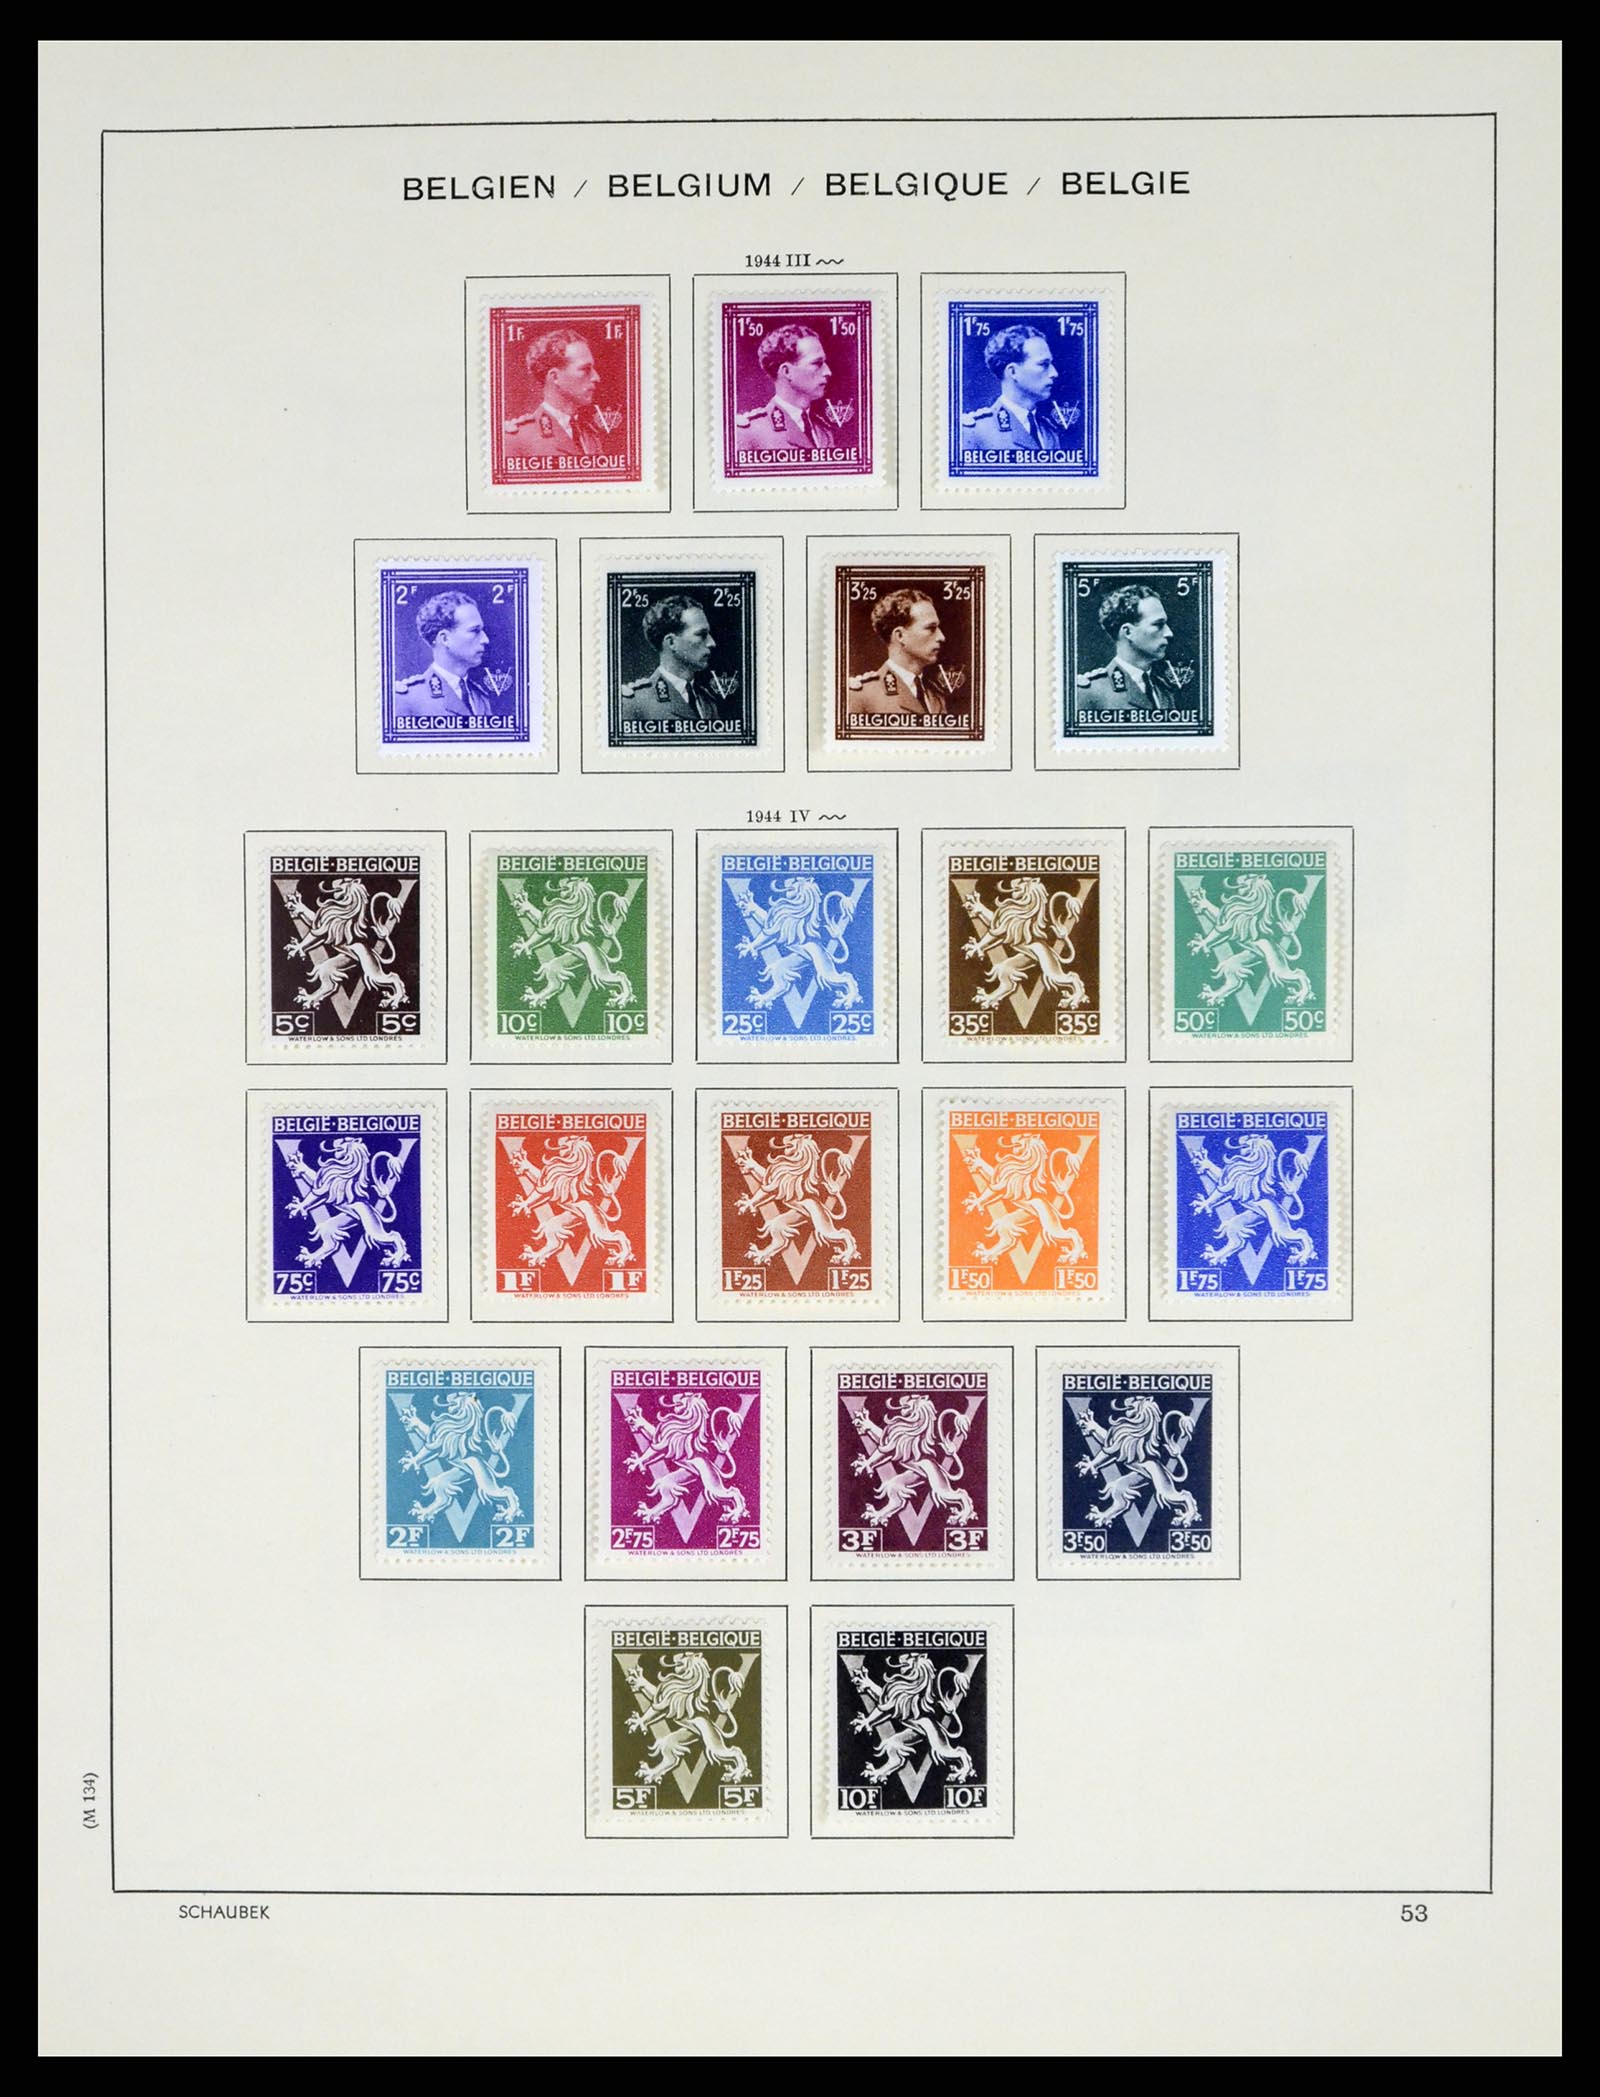 37595 060 - Stamp collection 37595 Super collection Belgium 1849-2015!